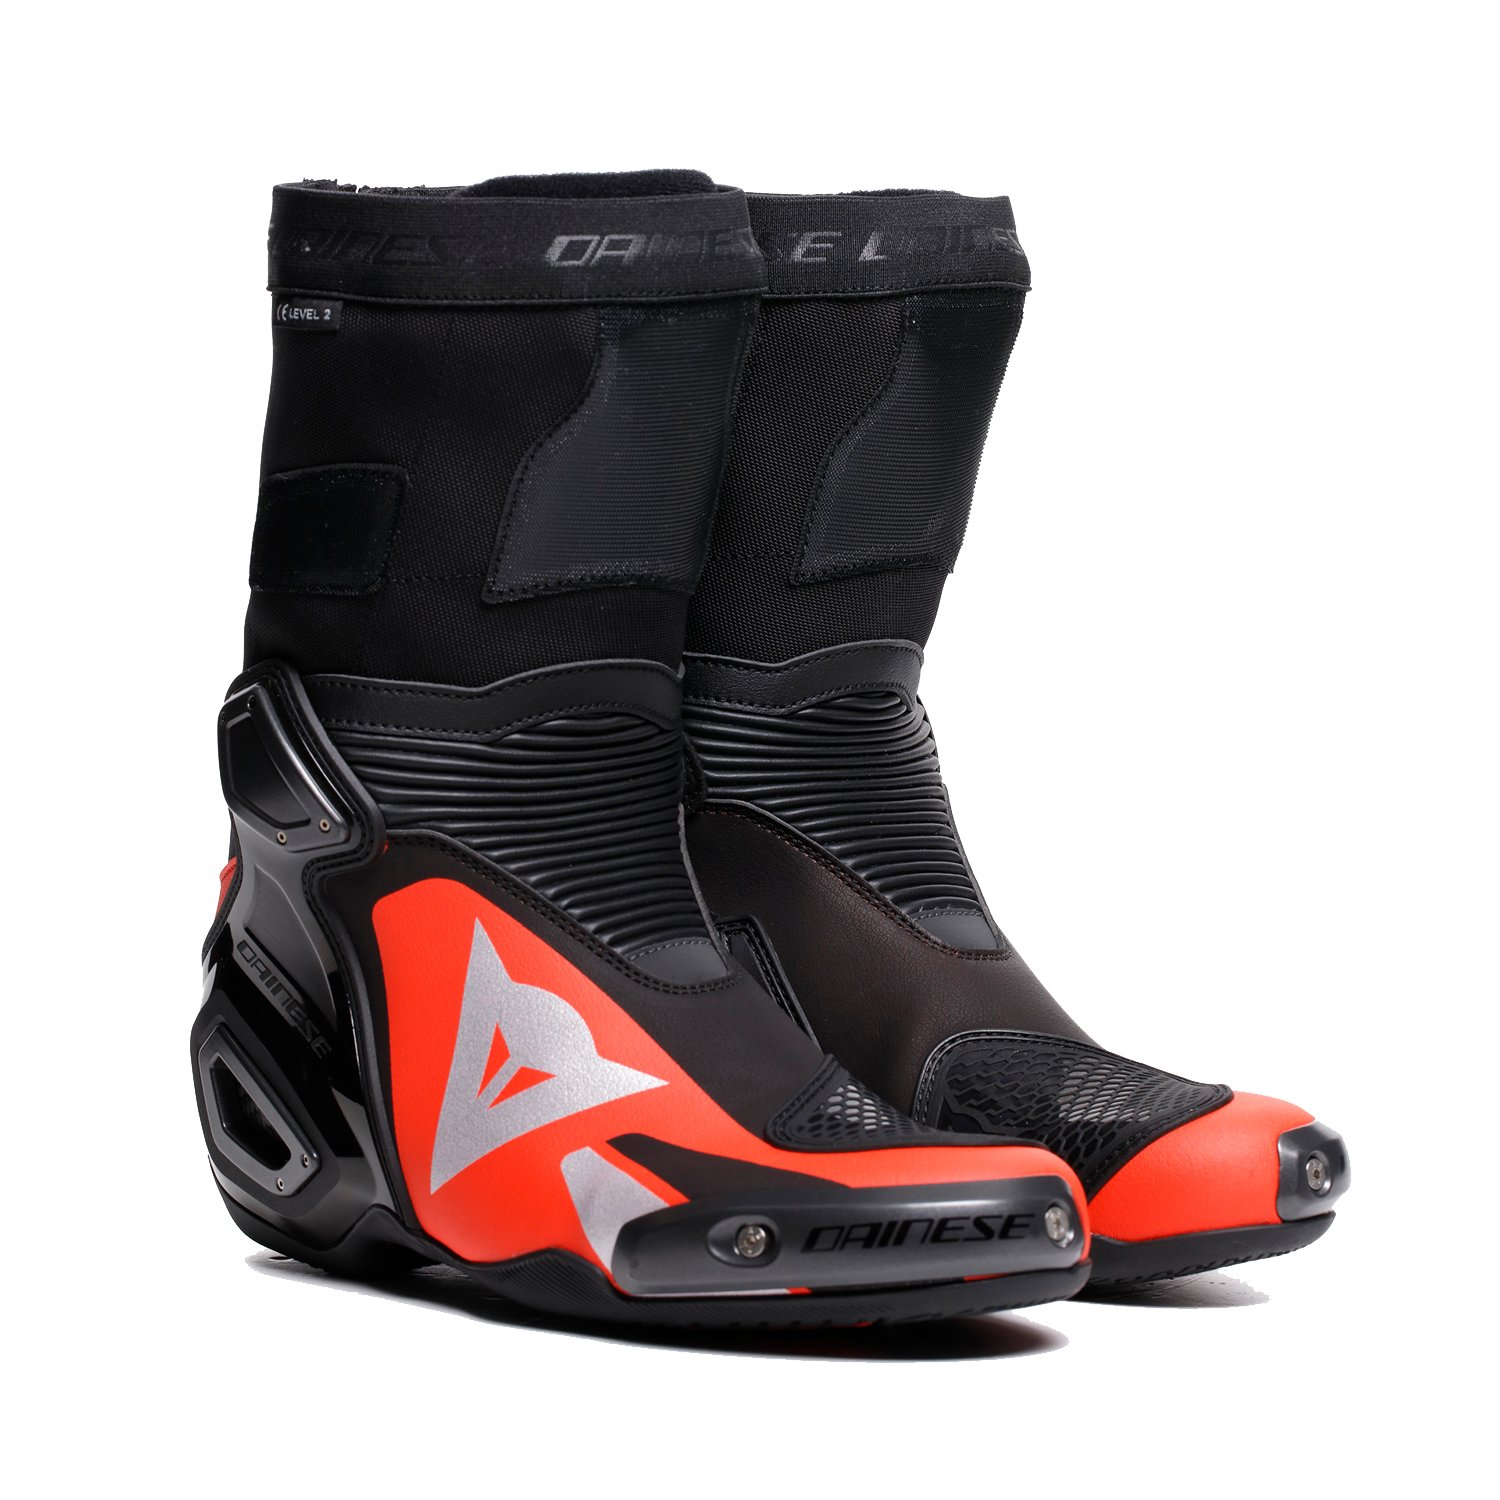 Image of Dainese Axial 2 Boots Black Red Fluo Size 40 ID 8051019739544